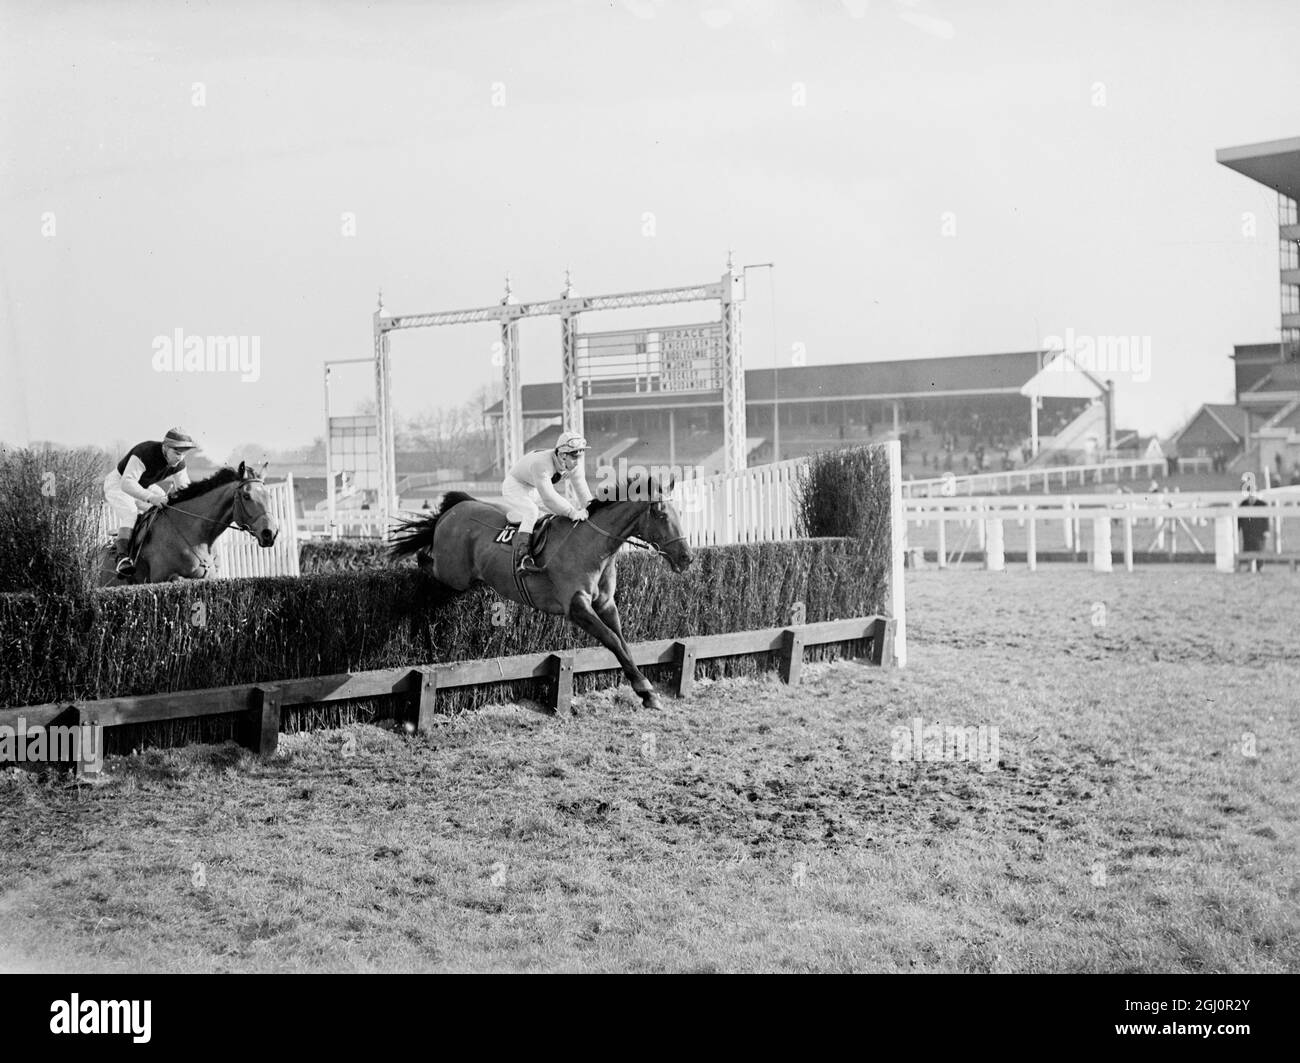 Pictured taking a fence in the Stanlake Handicap Steeple Chase over three miles ,five furlongs , for five years old and upwards at Ascot is the Spanish Duke of Alberquerque , owner rider of L'Empereur , which finished third in the race. L'Empereur was recently purchased by the Duke . The Duke , who is in his fifties , is one of the amateur riders entered for this year's Grand National at Aintree on 26 March , riding twelve-year-old L'Empereur who finished sixth at Aintree last year. It will be the Duke's fourth attempt in the race . 17 february 1966 Stock Photo